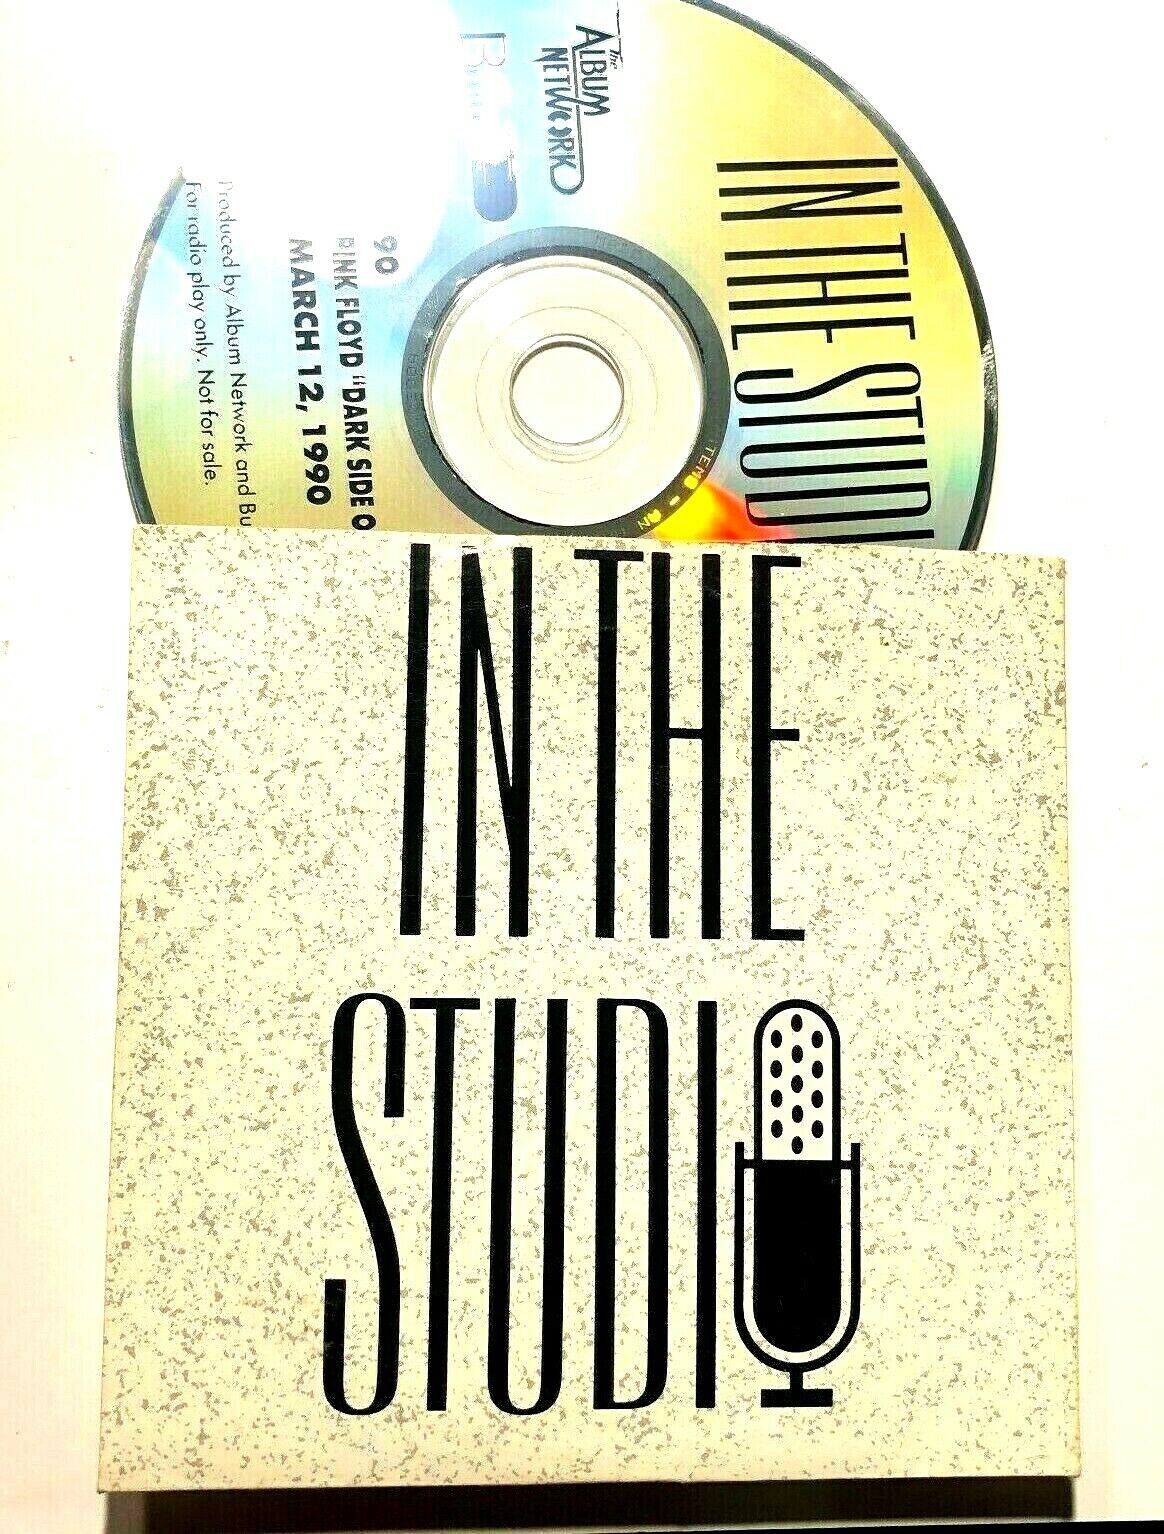 In The Studio # 90 The Dark Side Of the Moon  by Pink Floyd CD words & Music